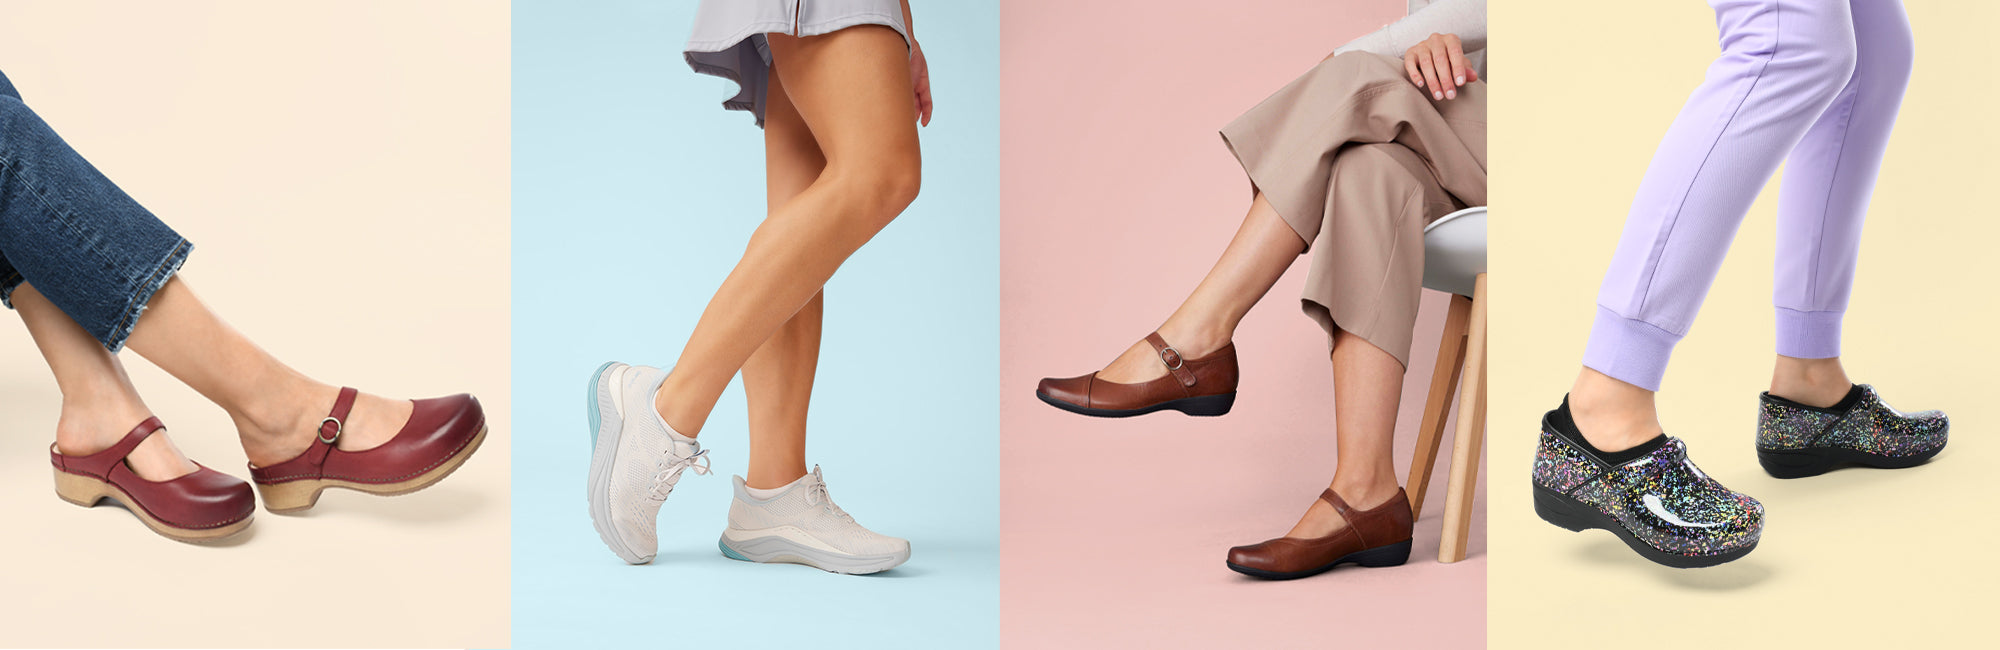 Four types of footwear styles on sale are shown. A red leather mule, a white active sneaker, brown leather Mary Janes, and a printed patent clog.